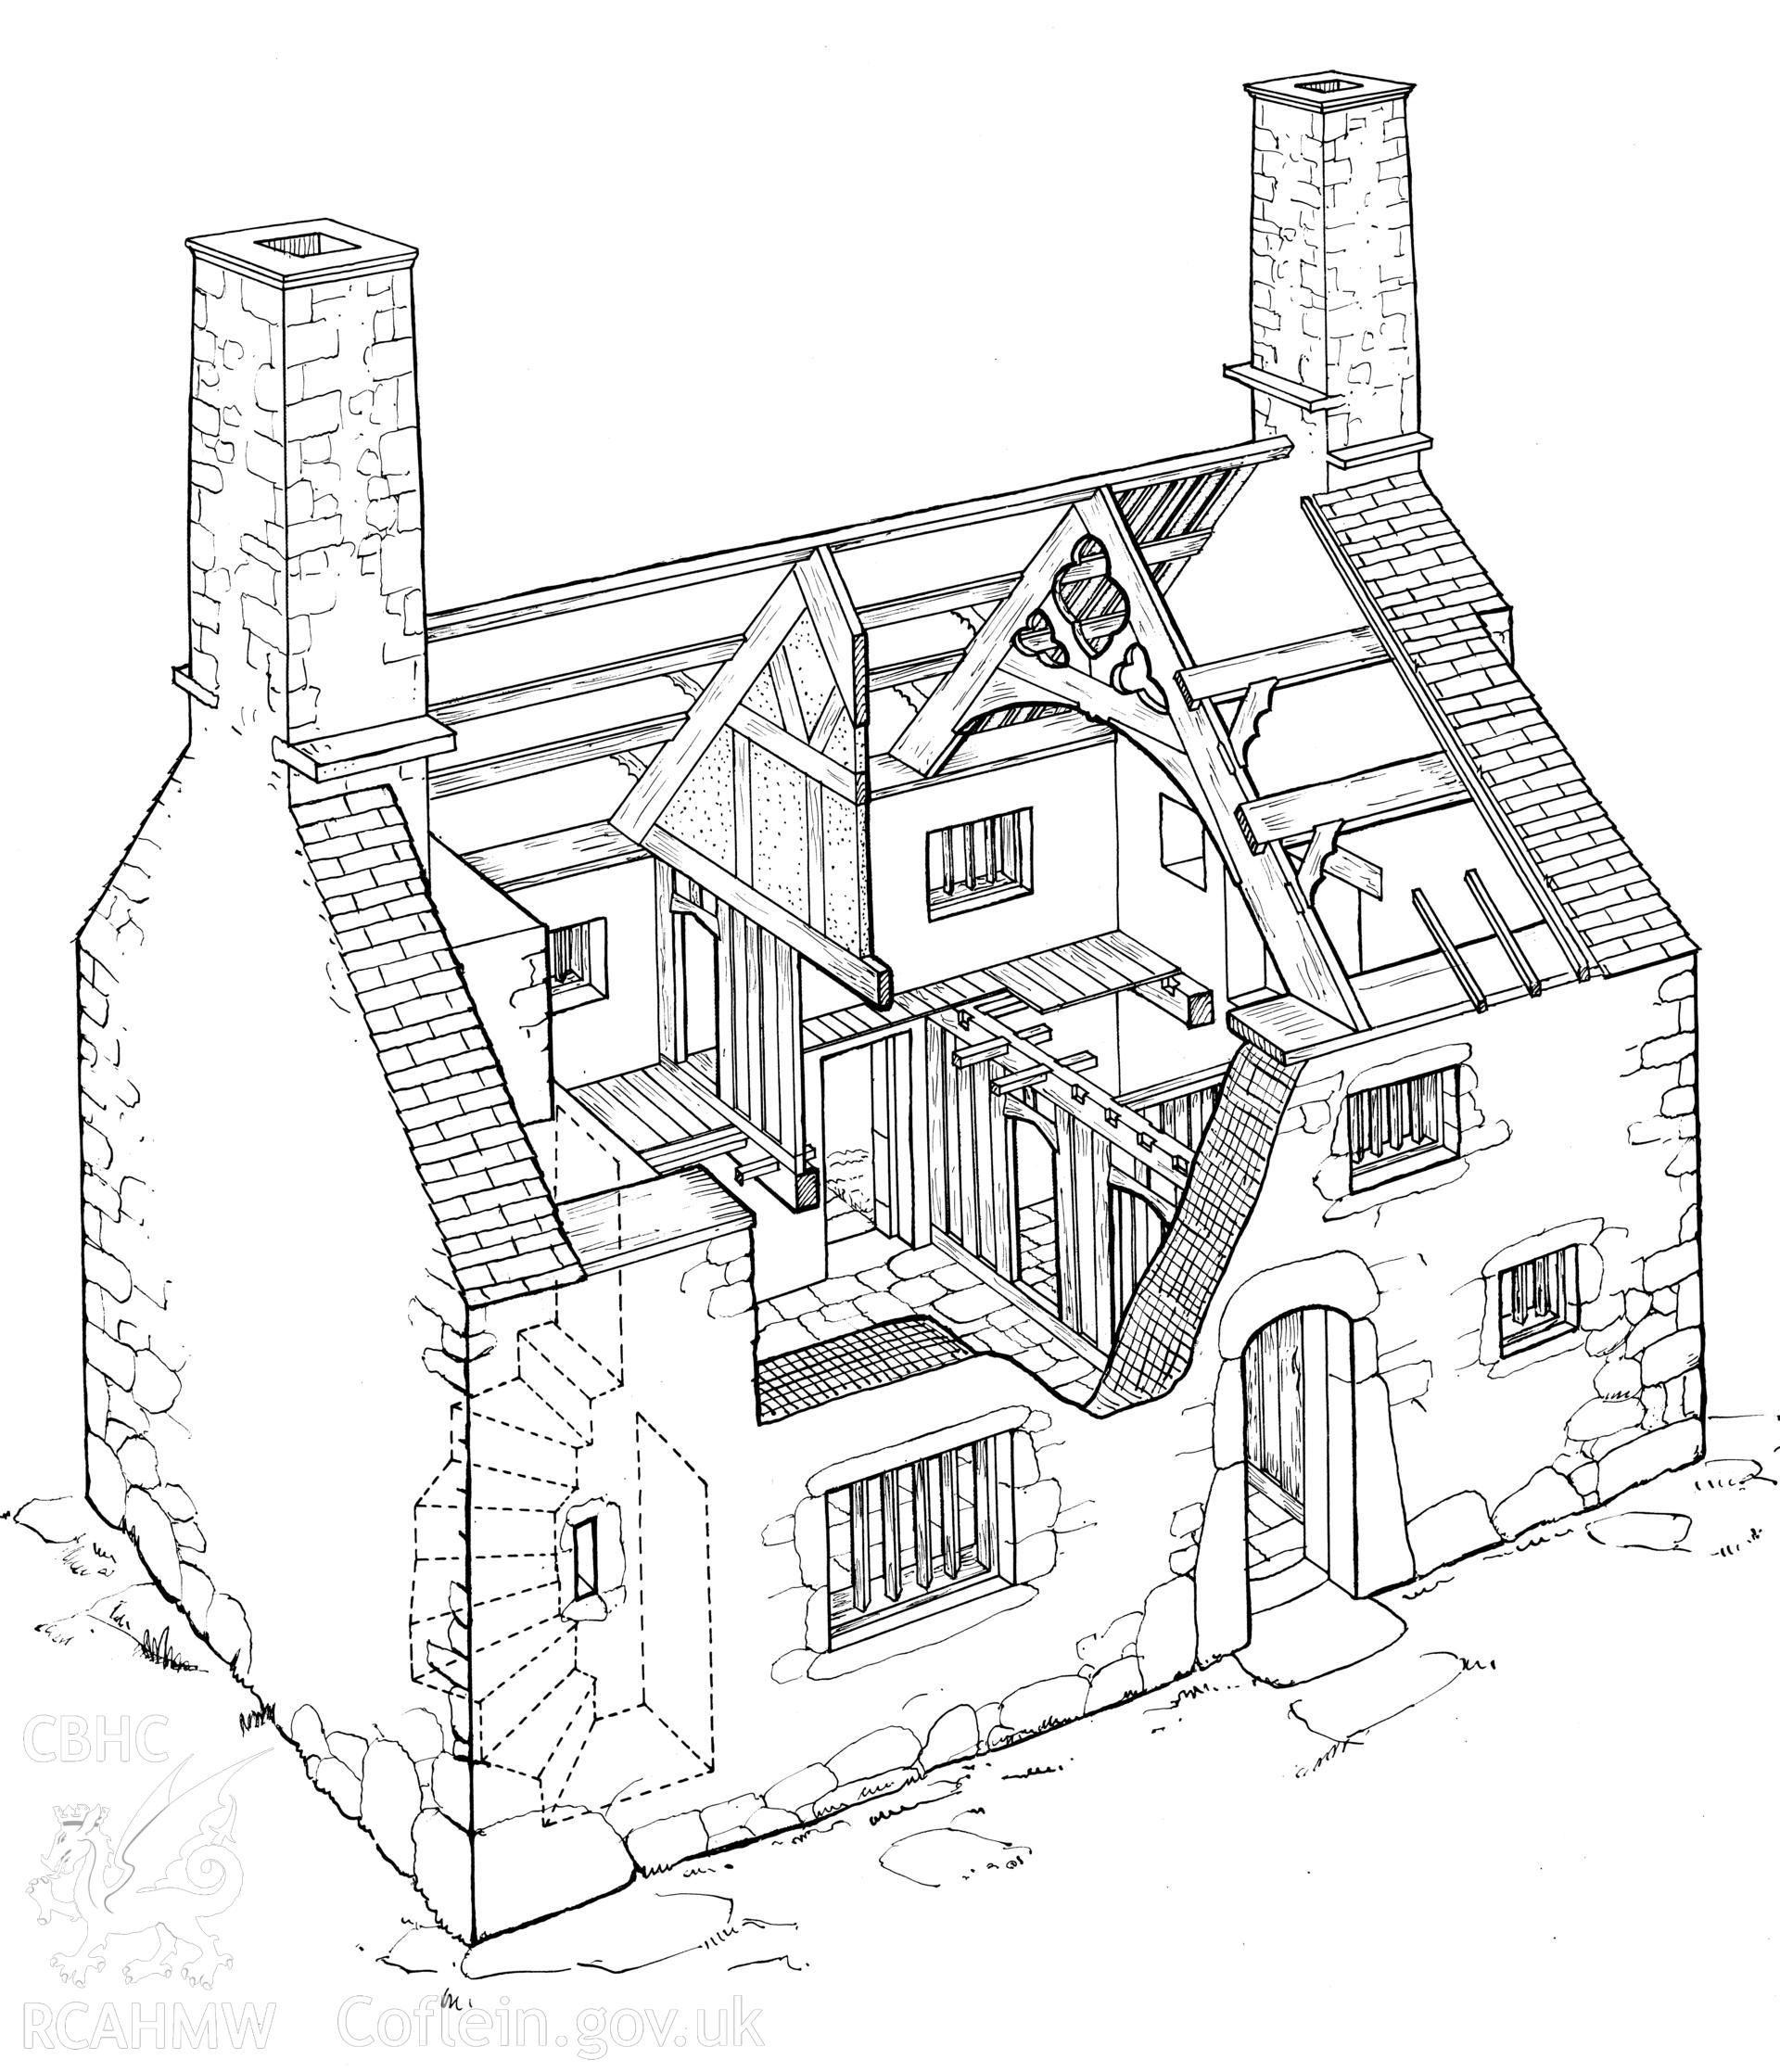 Digitised copy of a pen and ink cutaway drawing of a typical Snowdonian house, from RCAHMW publication, Houses of the Welsh Countryside, p.174, Fig. 81. Original not catalogued in NMRW Archive.